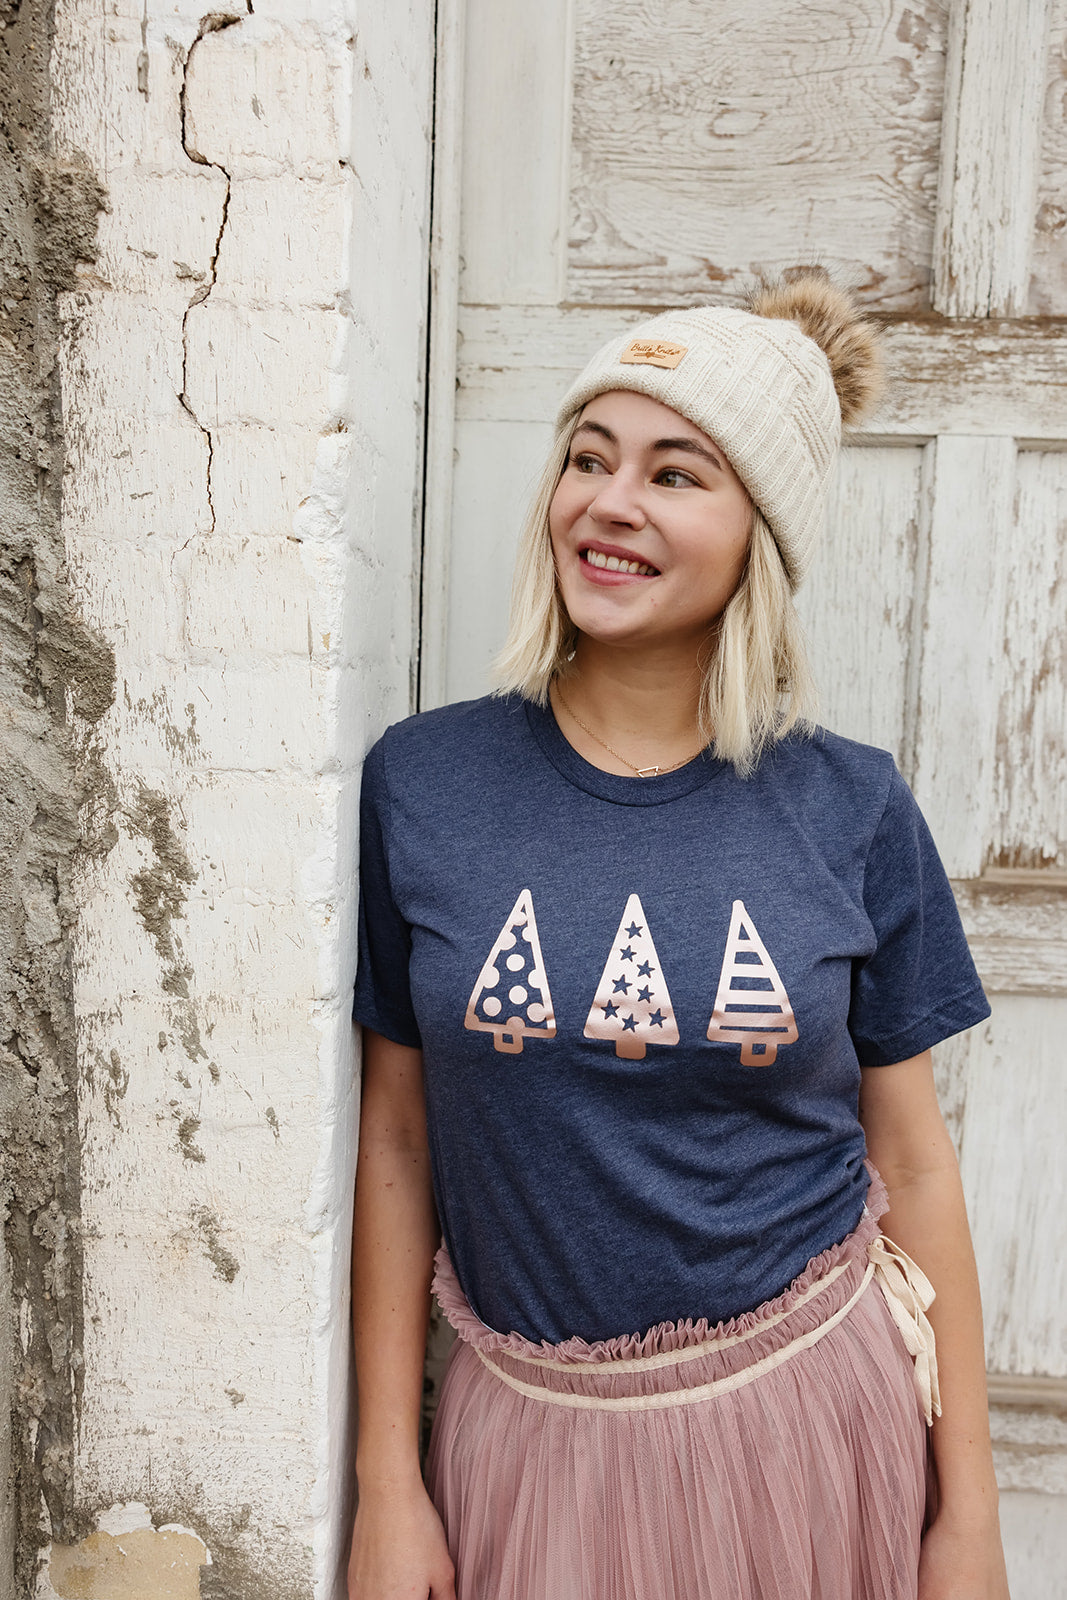 3 Christmas Trees Graphic Tee in Heather Navy  |  Short Sleeve Tee in Adult & Youth sizes